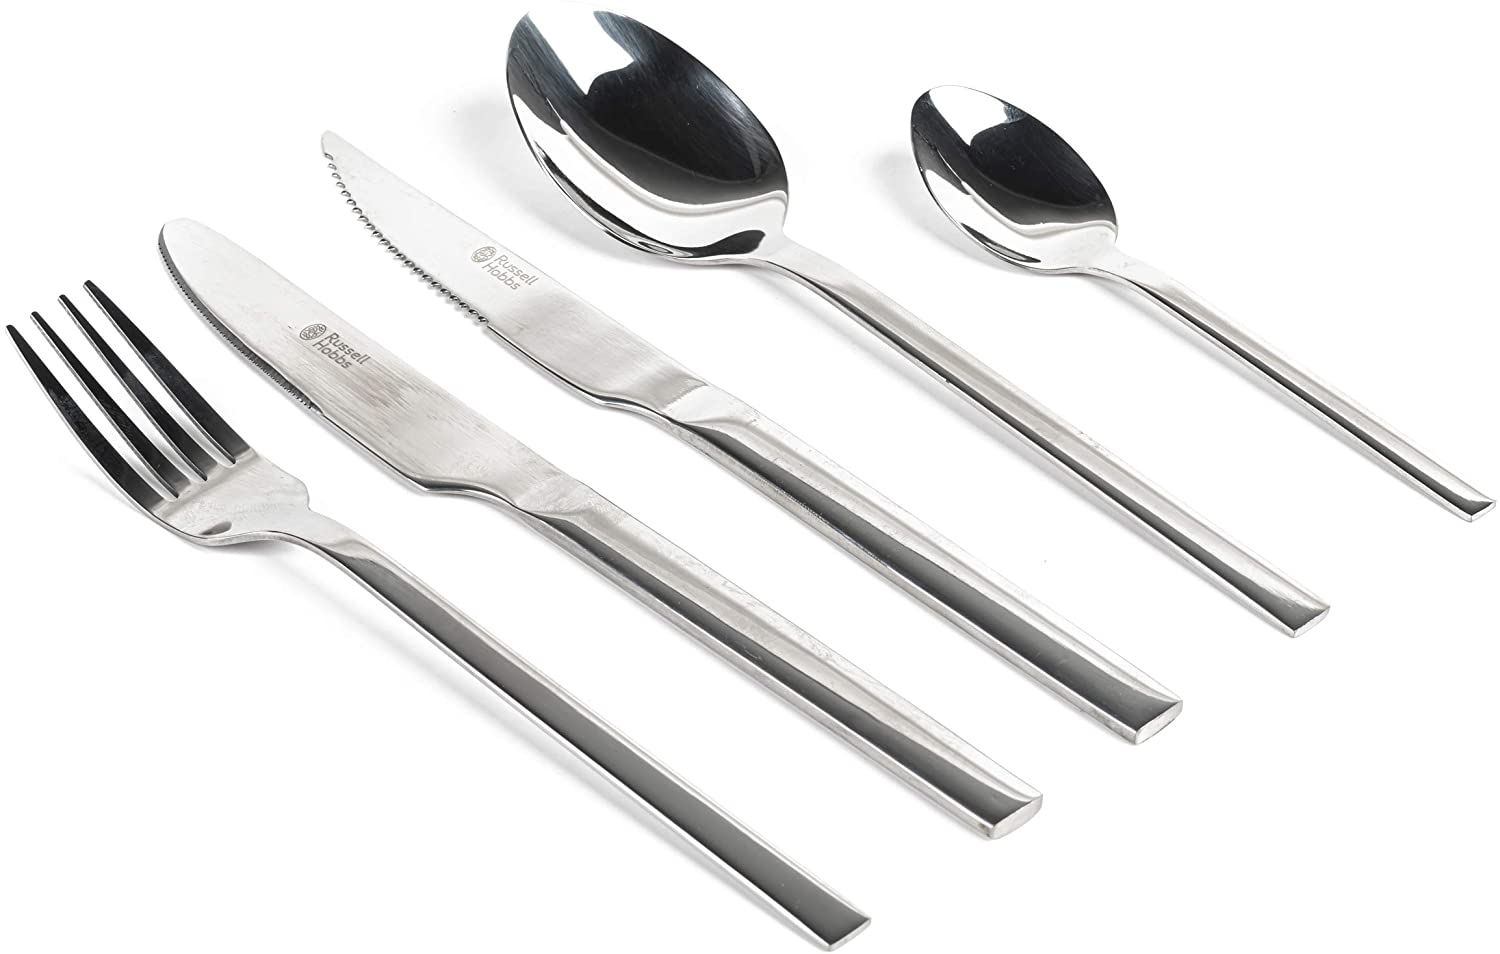 Russell Hobbs® RH00855EU Vermont Set of 20 Stainless Steel Cutlery for 4 People, Includes Steak Knife, Polished Stainless Steel